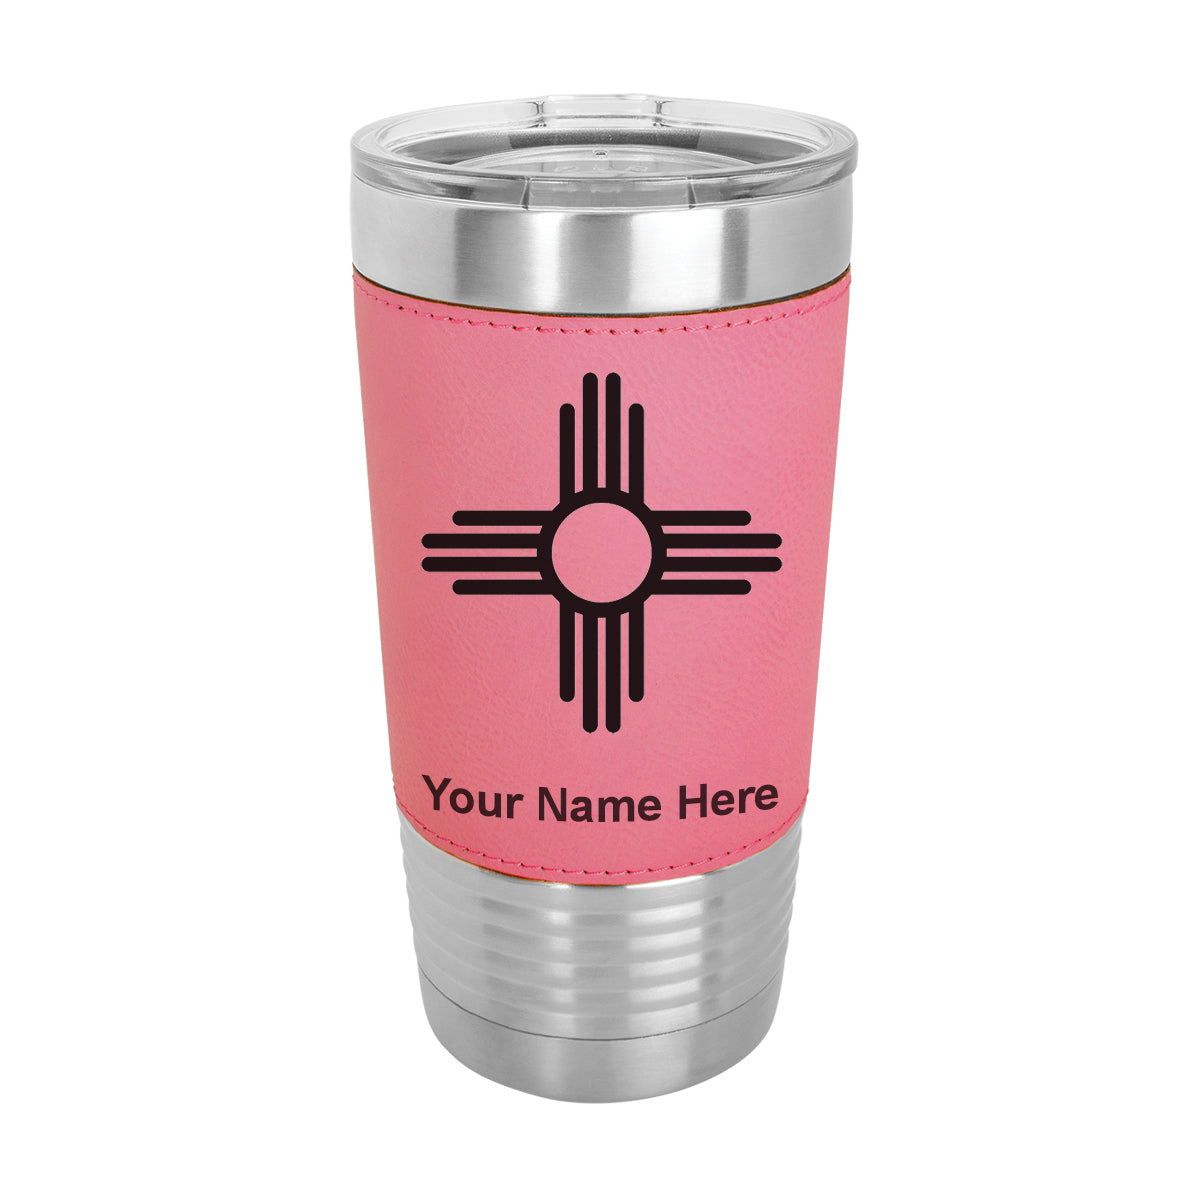 20oz Faux Leather Tumbler Mug, Flag of New Mexico, Personalized Engraving Included - LaserGram Custom Engraved Gifts